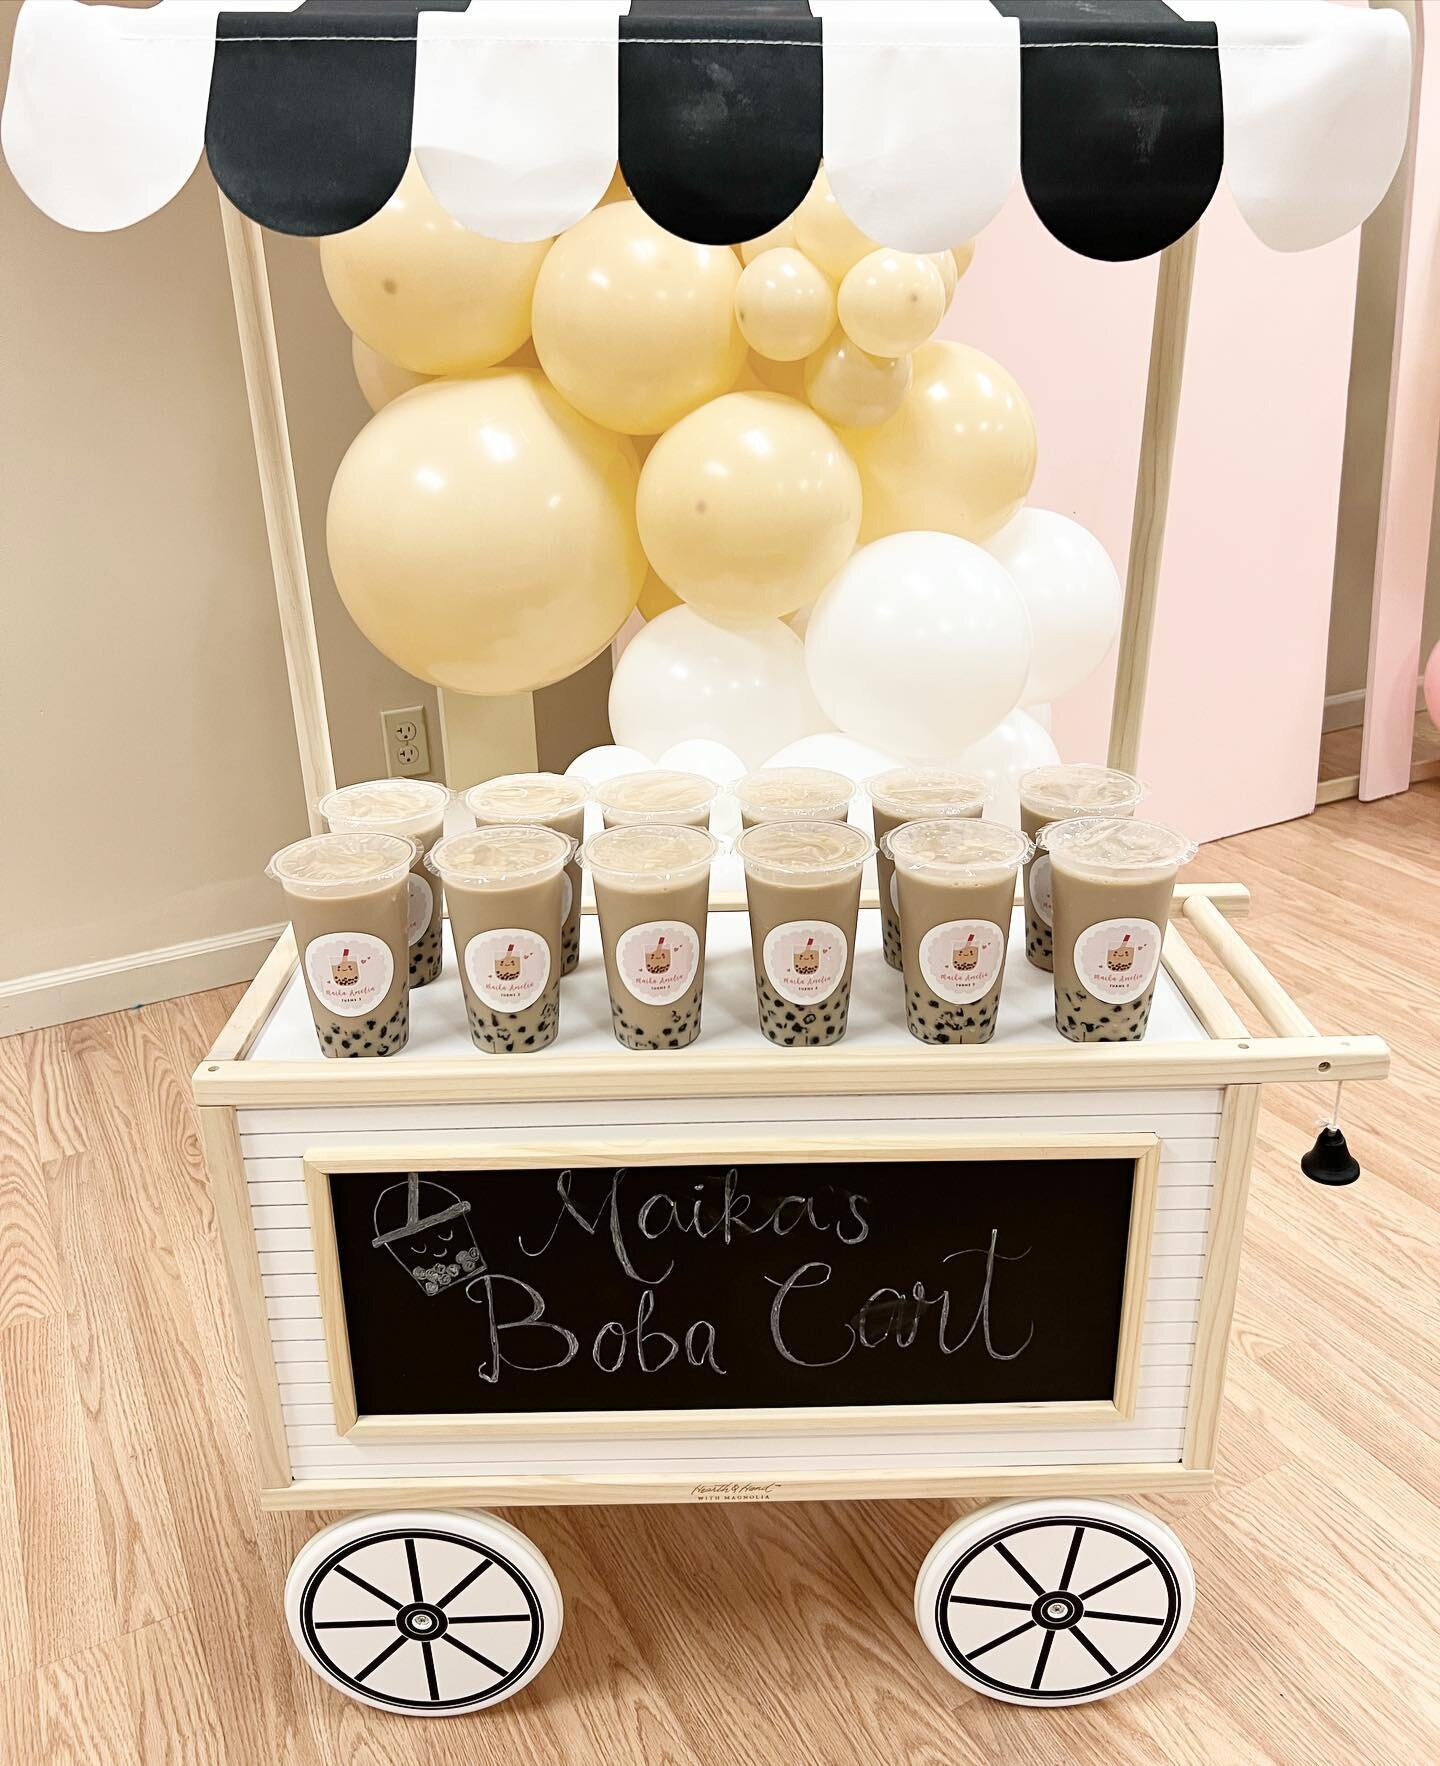 When the entire birthday is boba themed 🧋🤌🏽 Thank you for letting us be a part of this cute boba-themed birthday party! We had so much fun!

@aikafoz 
@cookiesbykaila 
@tito.bubbles 
@gianevents.vanessa 

#bobacatering